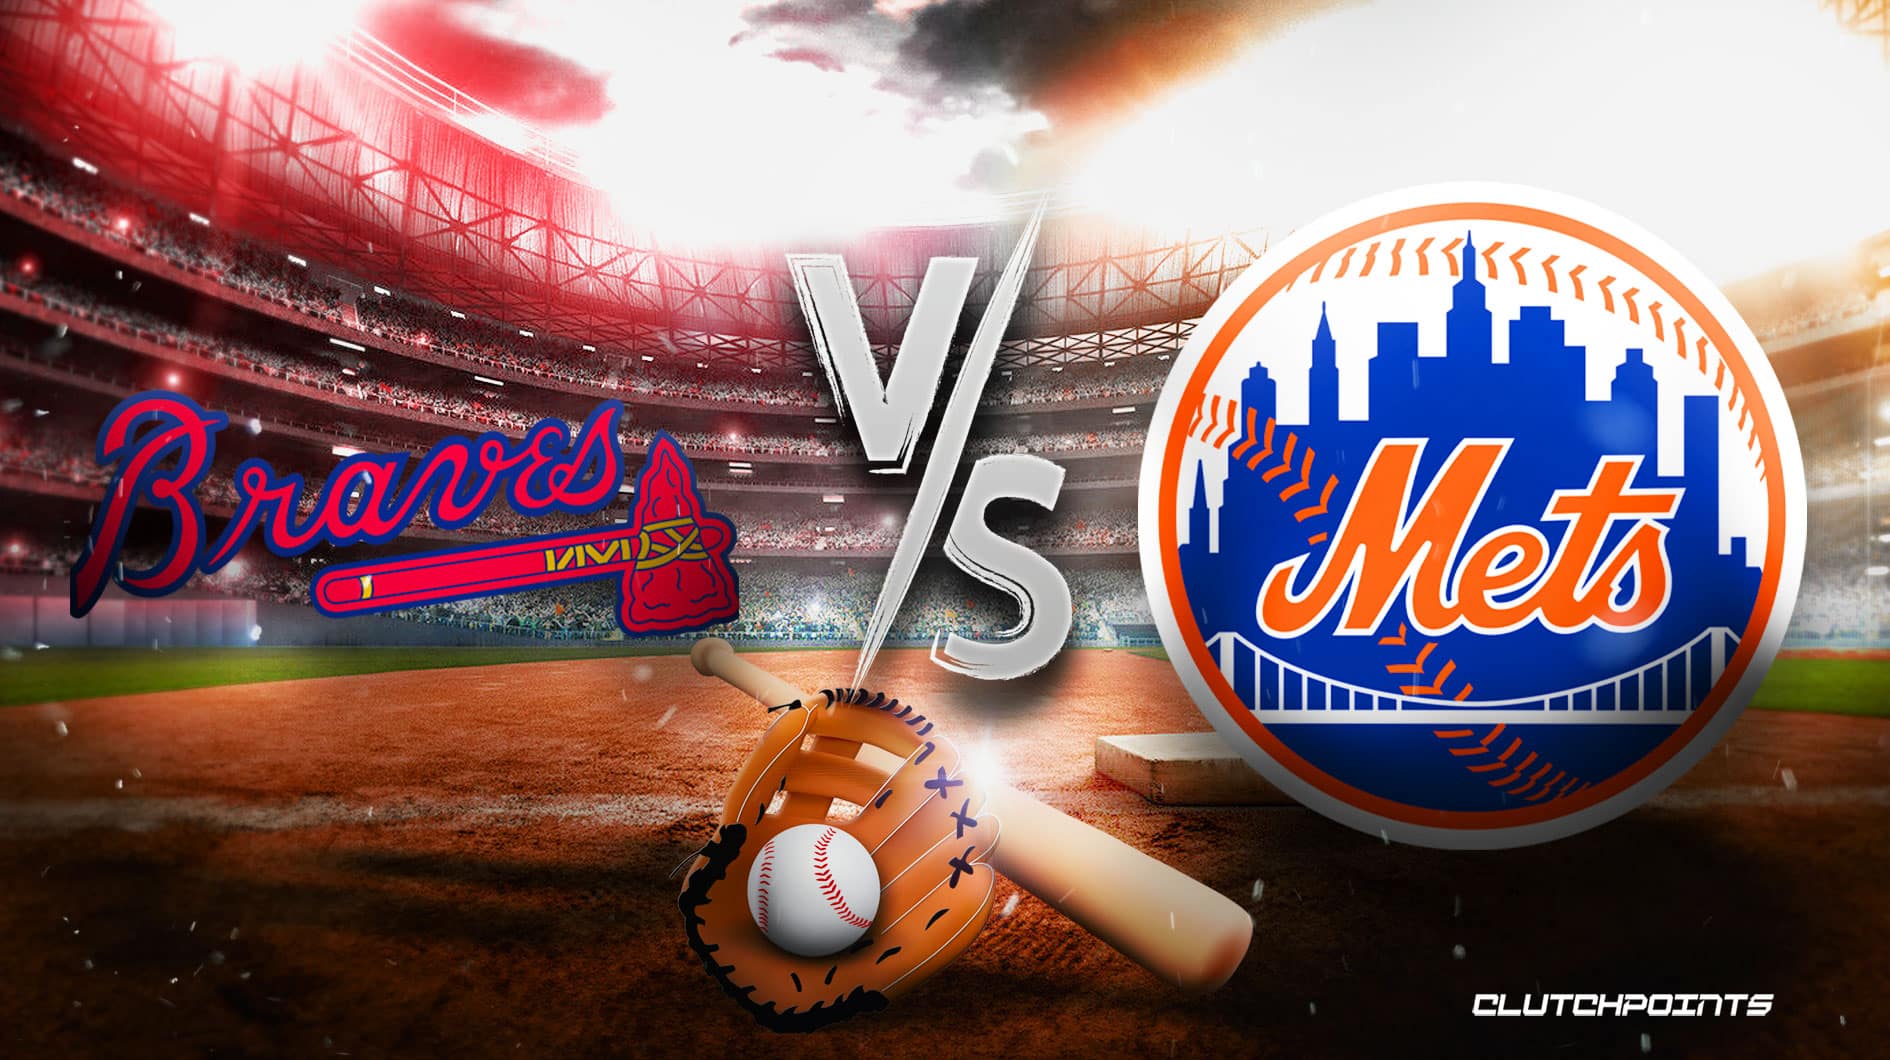 MLB Odds Braves Mets Game 1 prediction, pick, how to watch